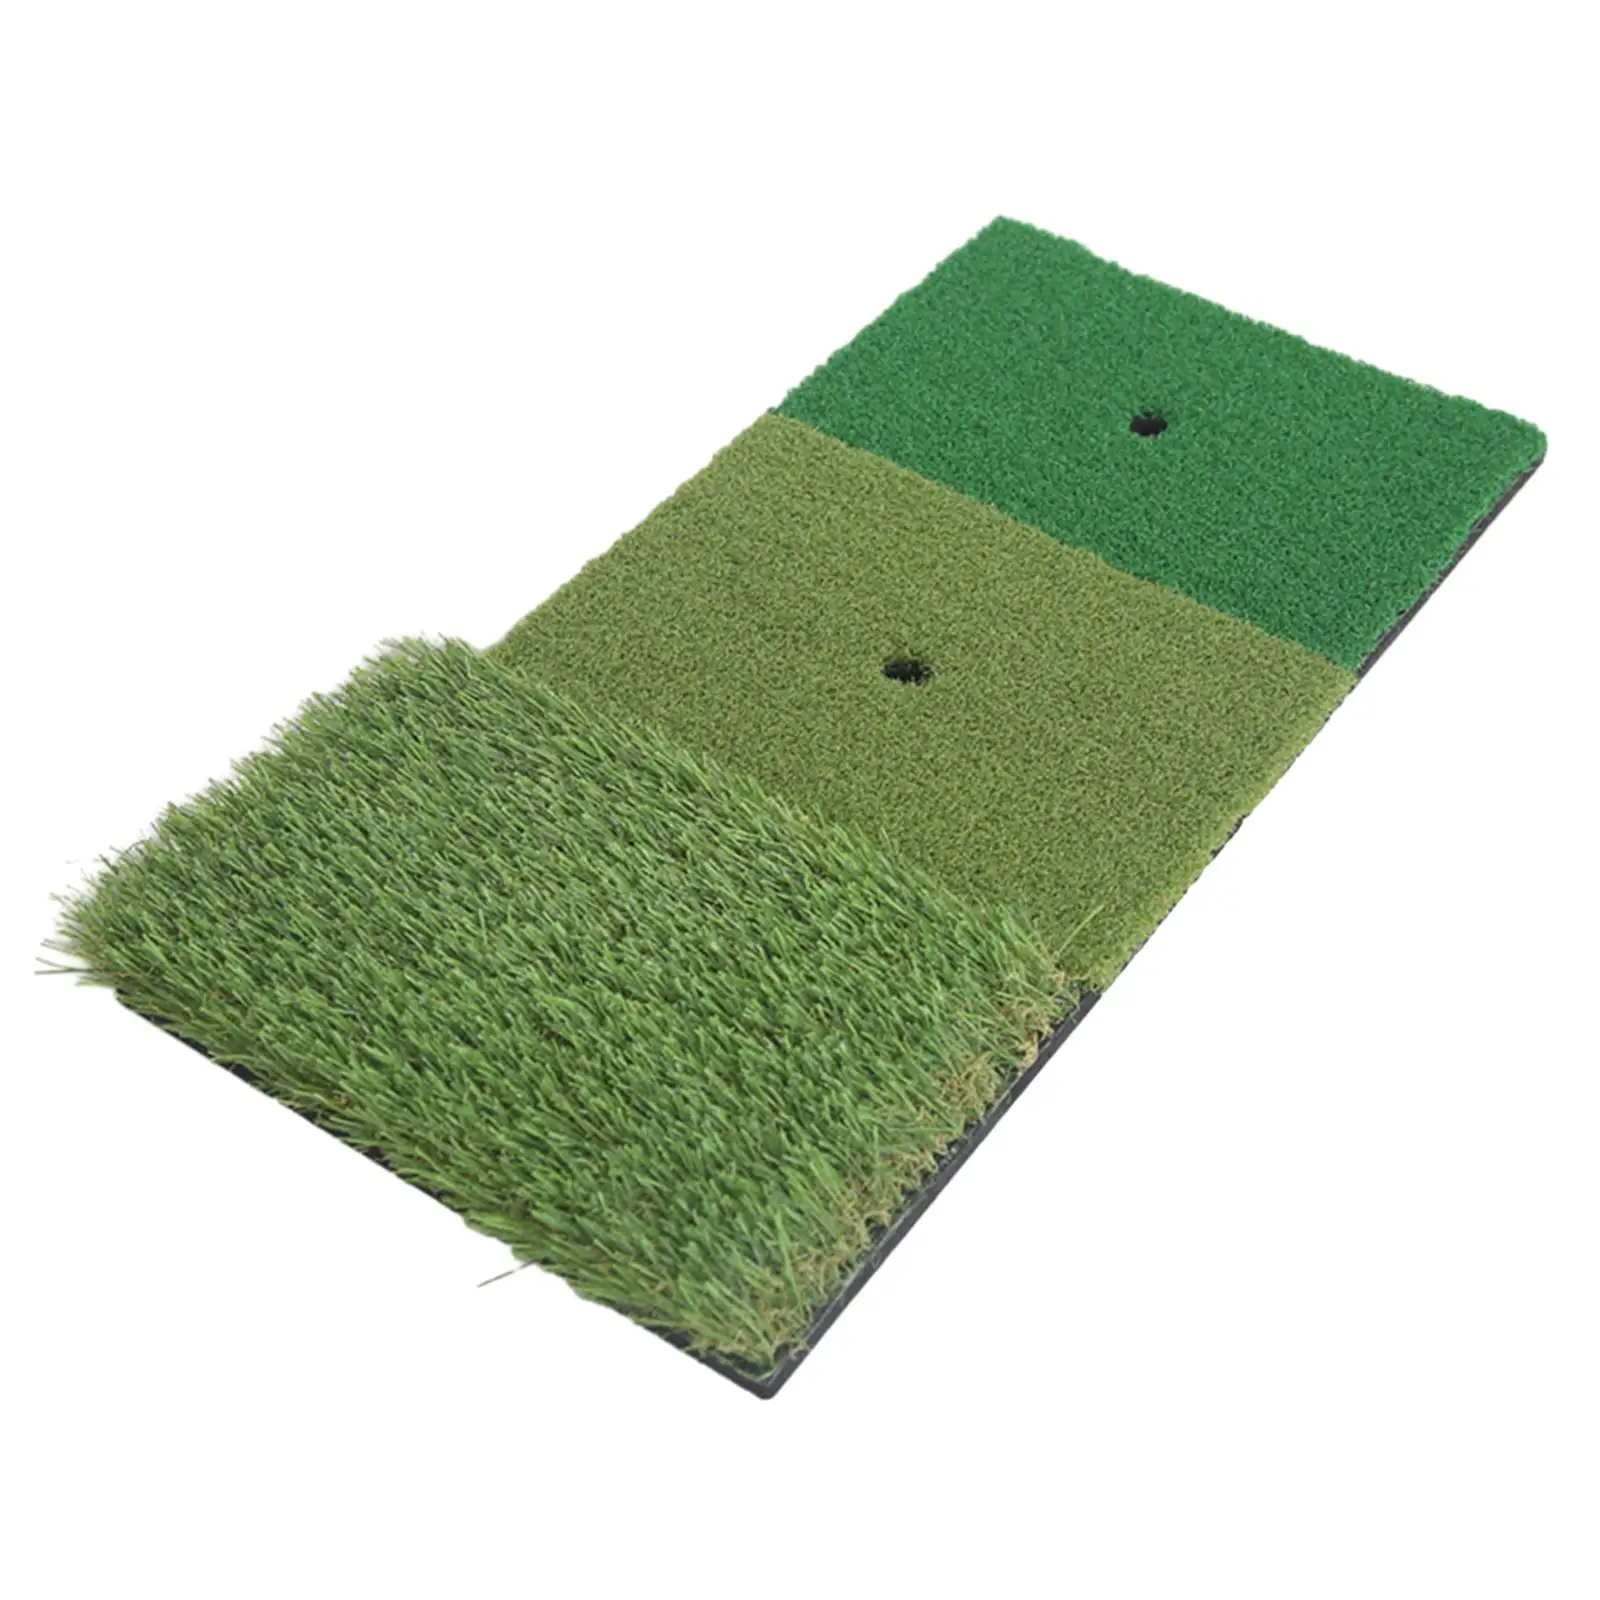 Golf Hitting Pad Collapsible 3in1 Putting Mat for Indoor Garages Home Office